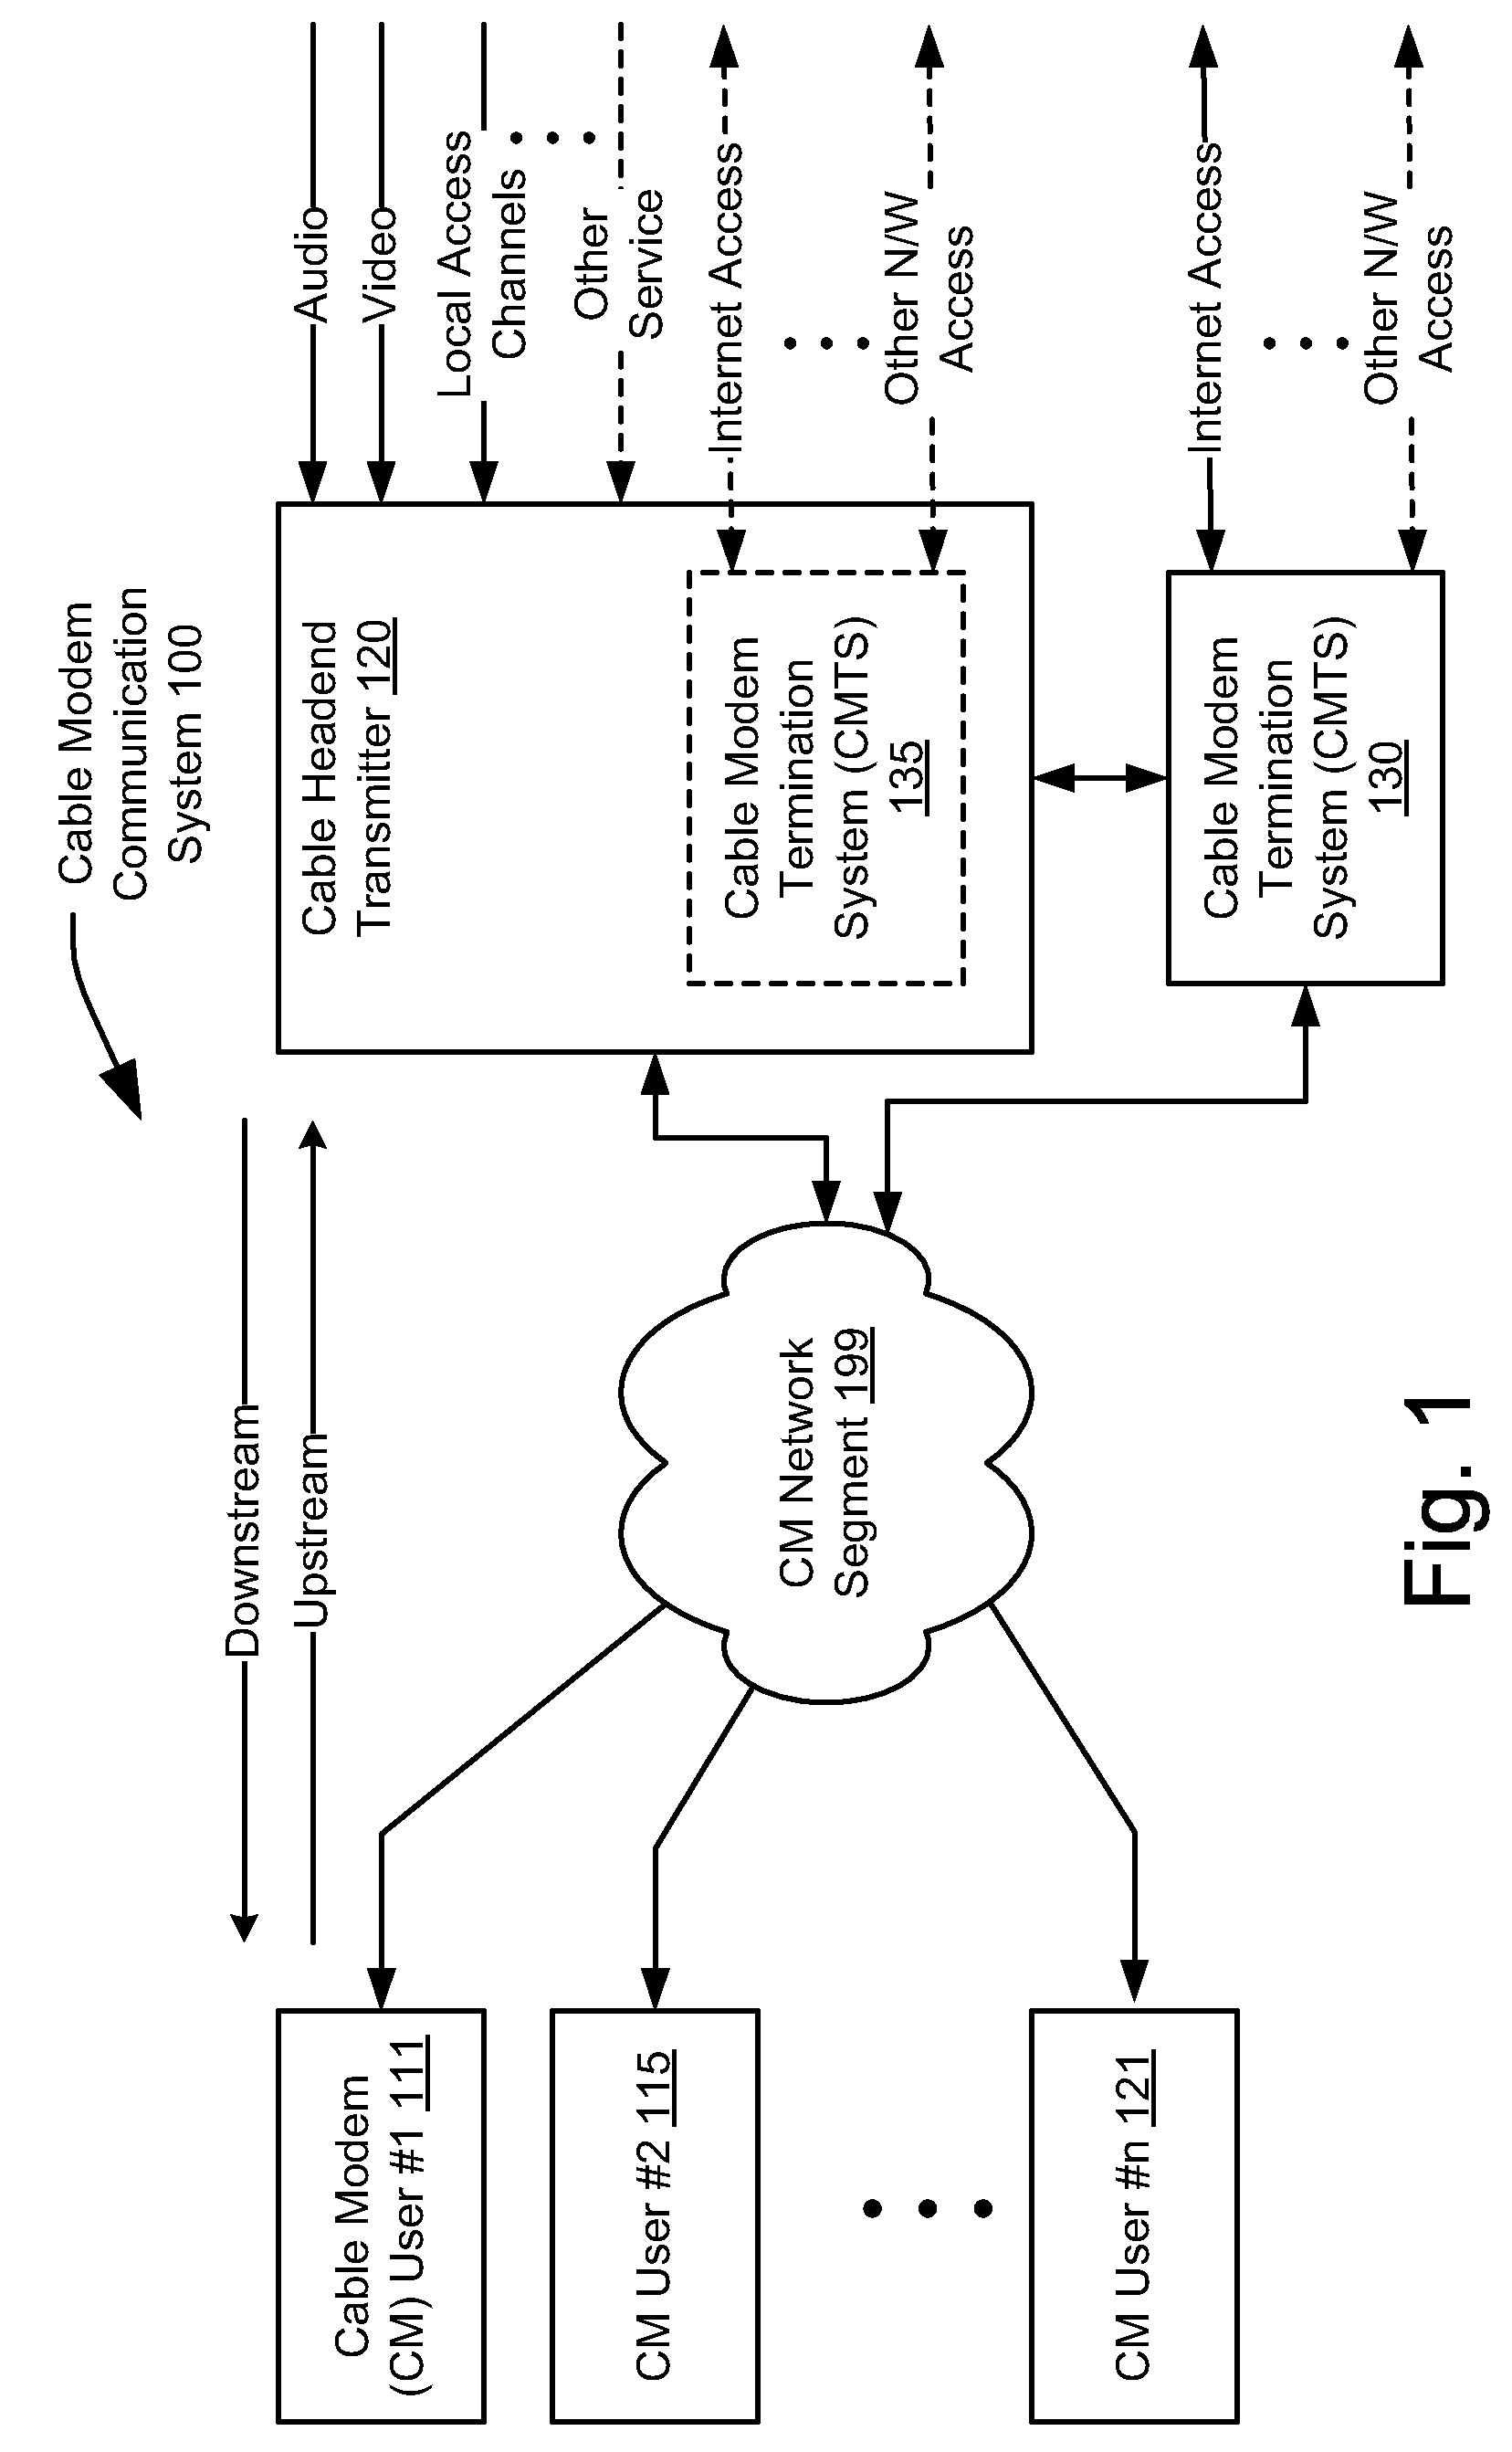 Enhanced channel changing within multi-channel communication systems